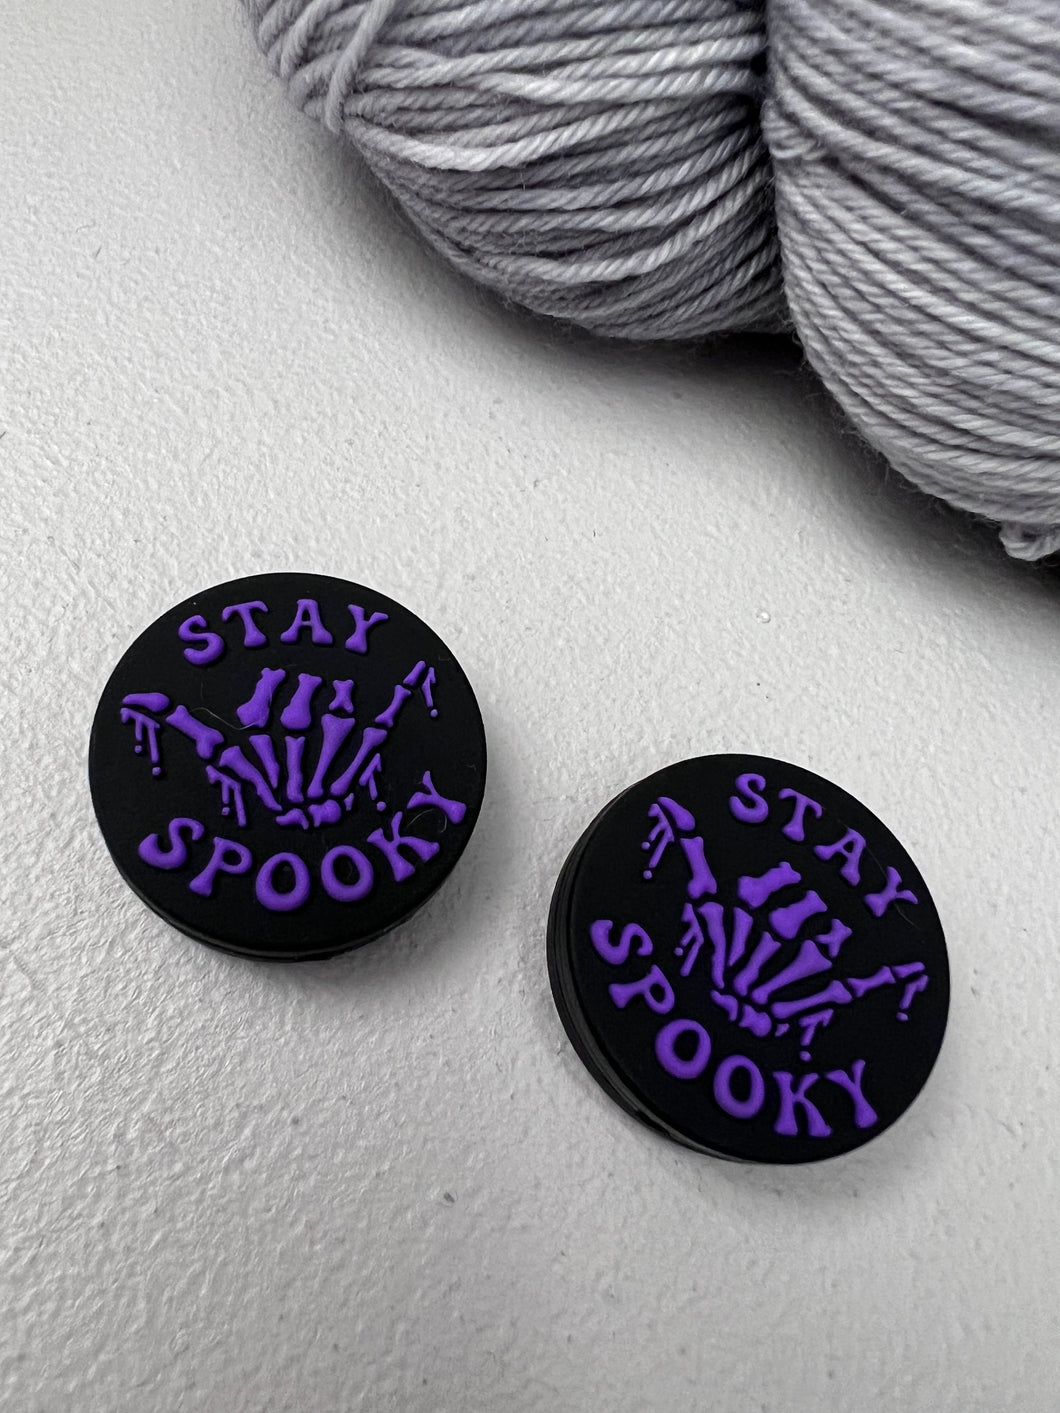 Stay Spooky Needle Stoppers